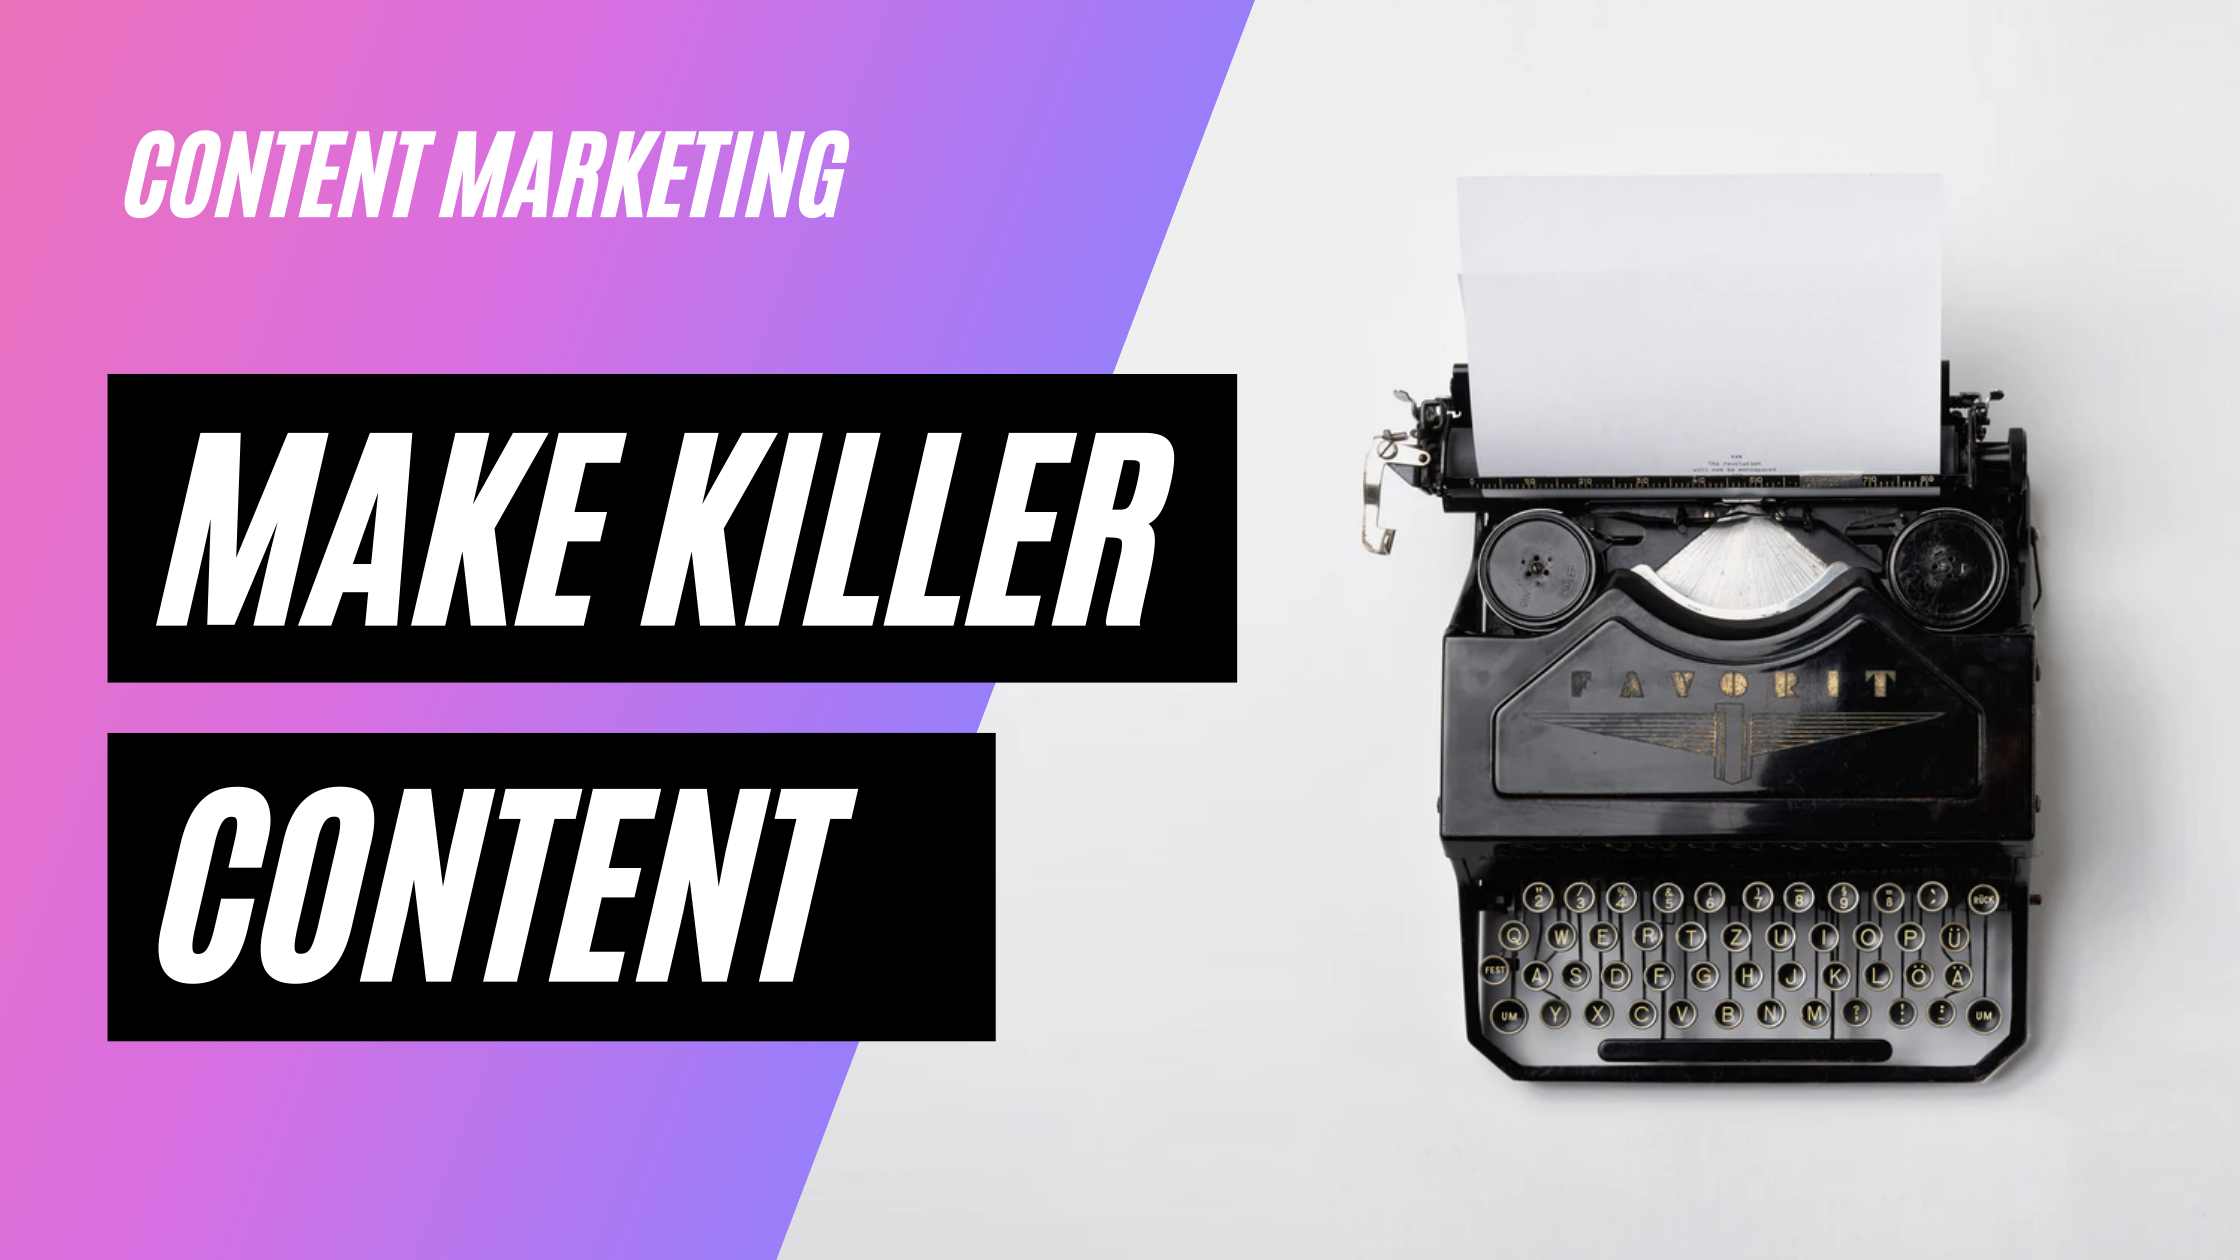 Creating Highly Effective Content - Basic Principles of Content Marketing